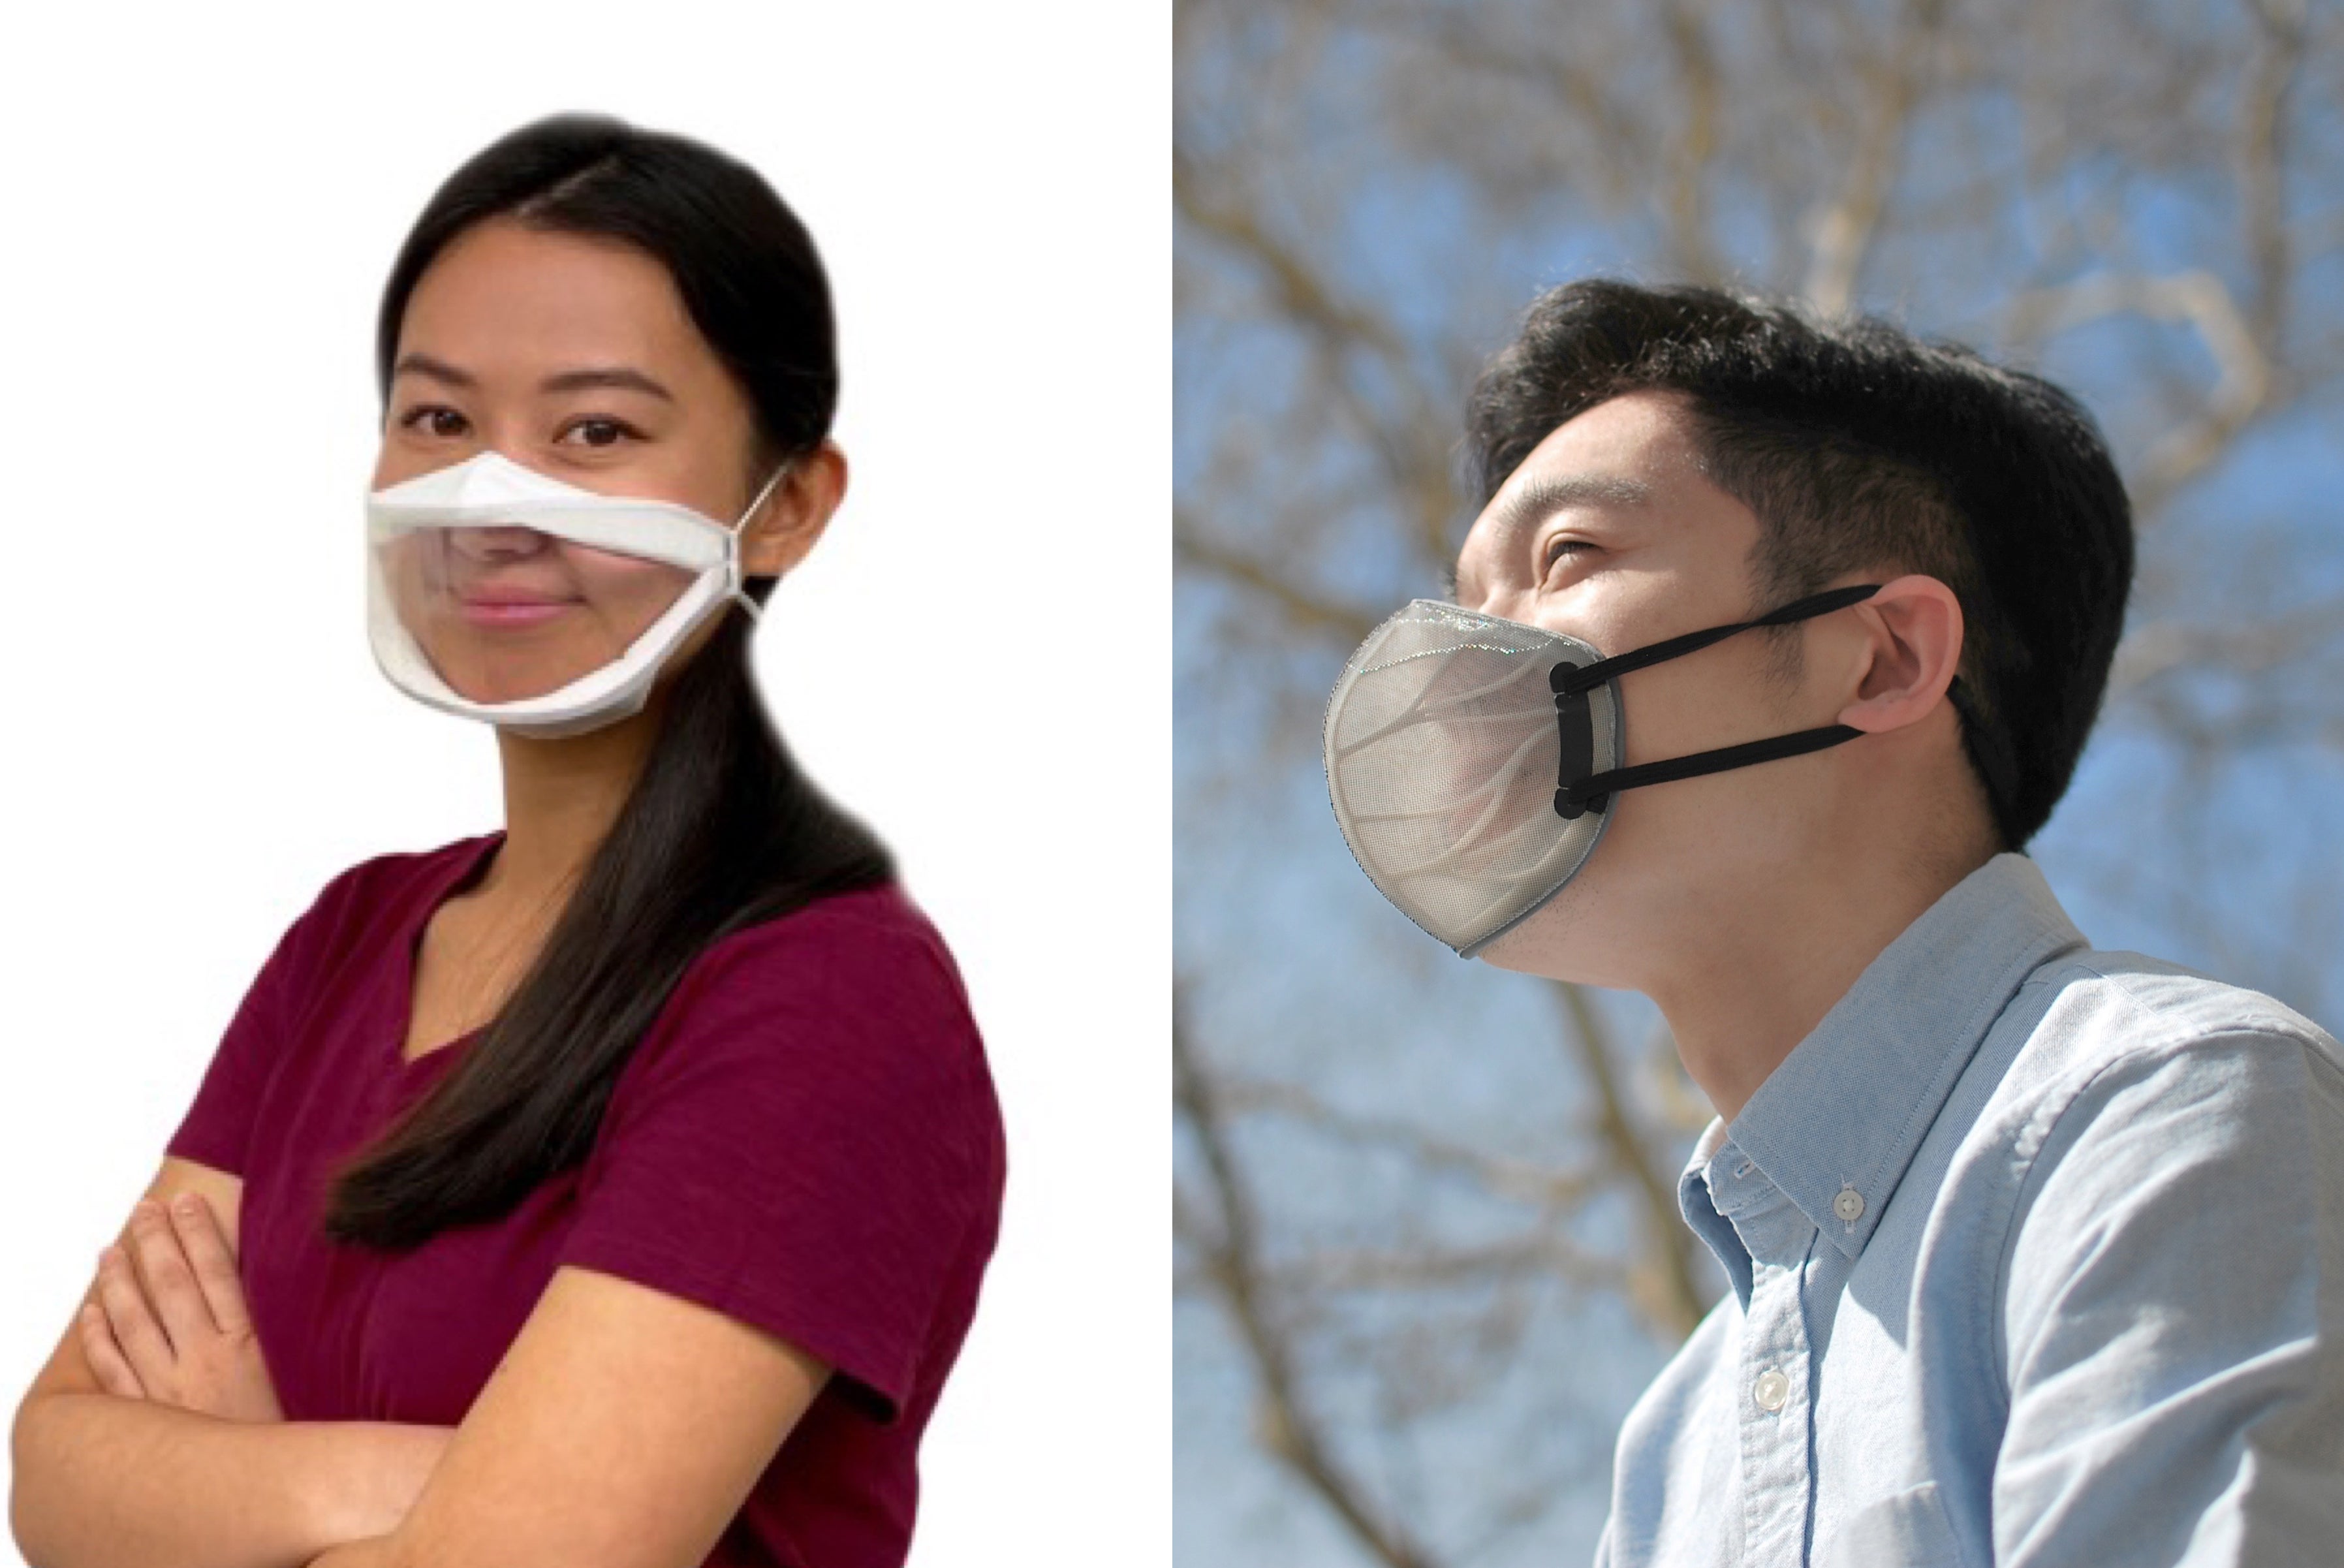 Several finalists, including ClearMask (left) and BreSafe (right) created transparent or semi-transparent face coverings that make it easier to read facial expressions without sacrificing filtration.